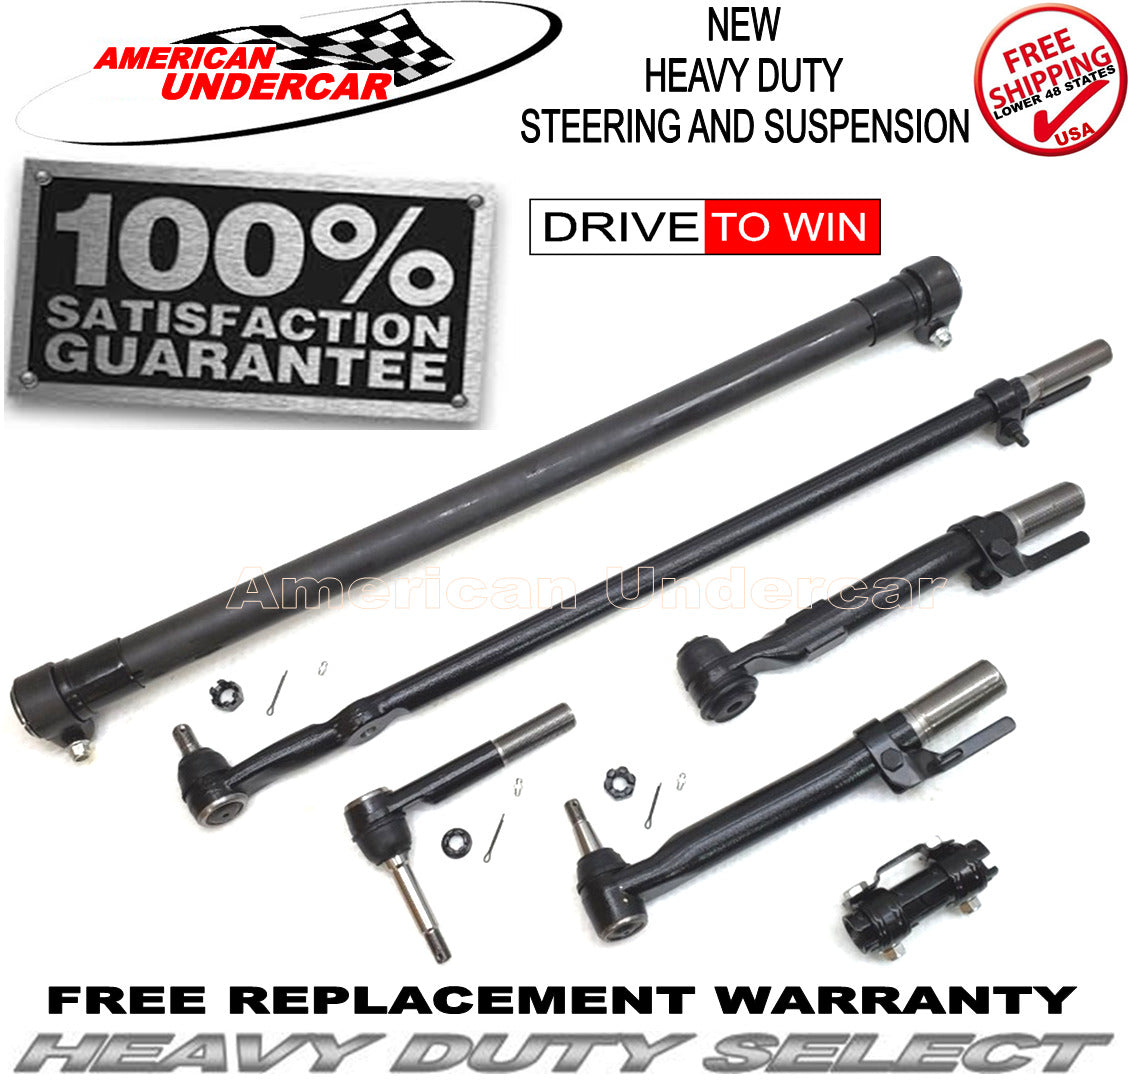 HD Drag Link Tie Rod Sleeve Steering Kit for 2005-2007 Ford F250, F350 Super Duty 4x4